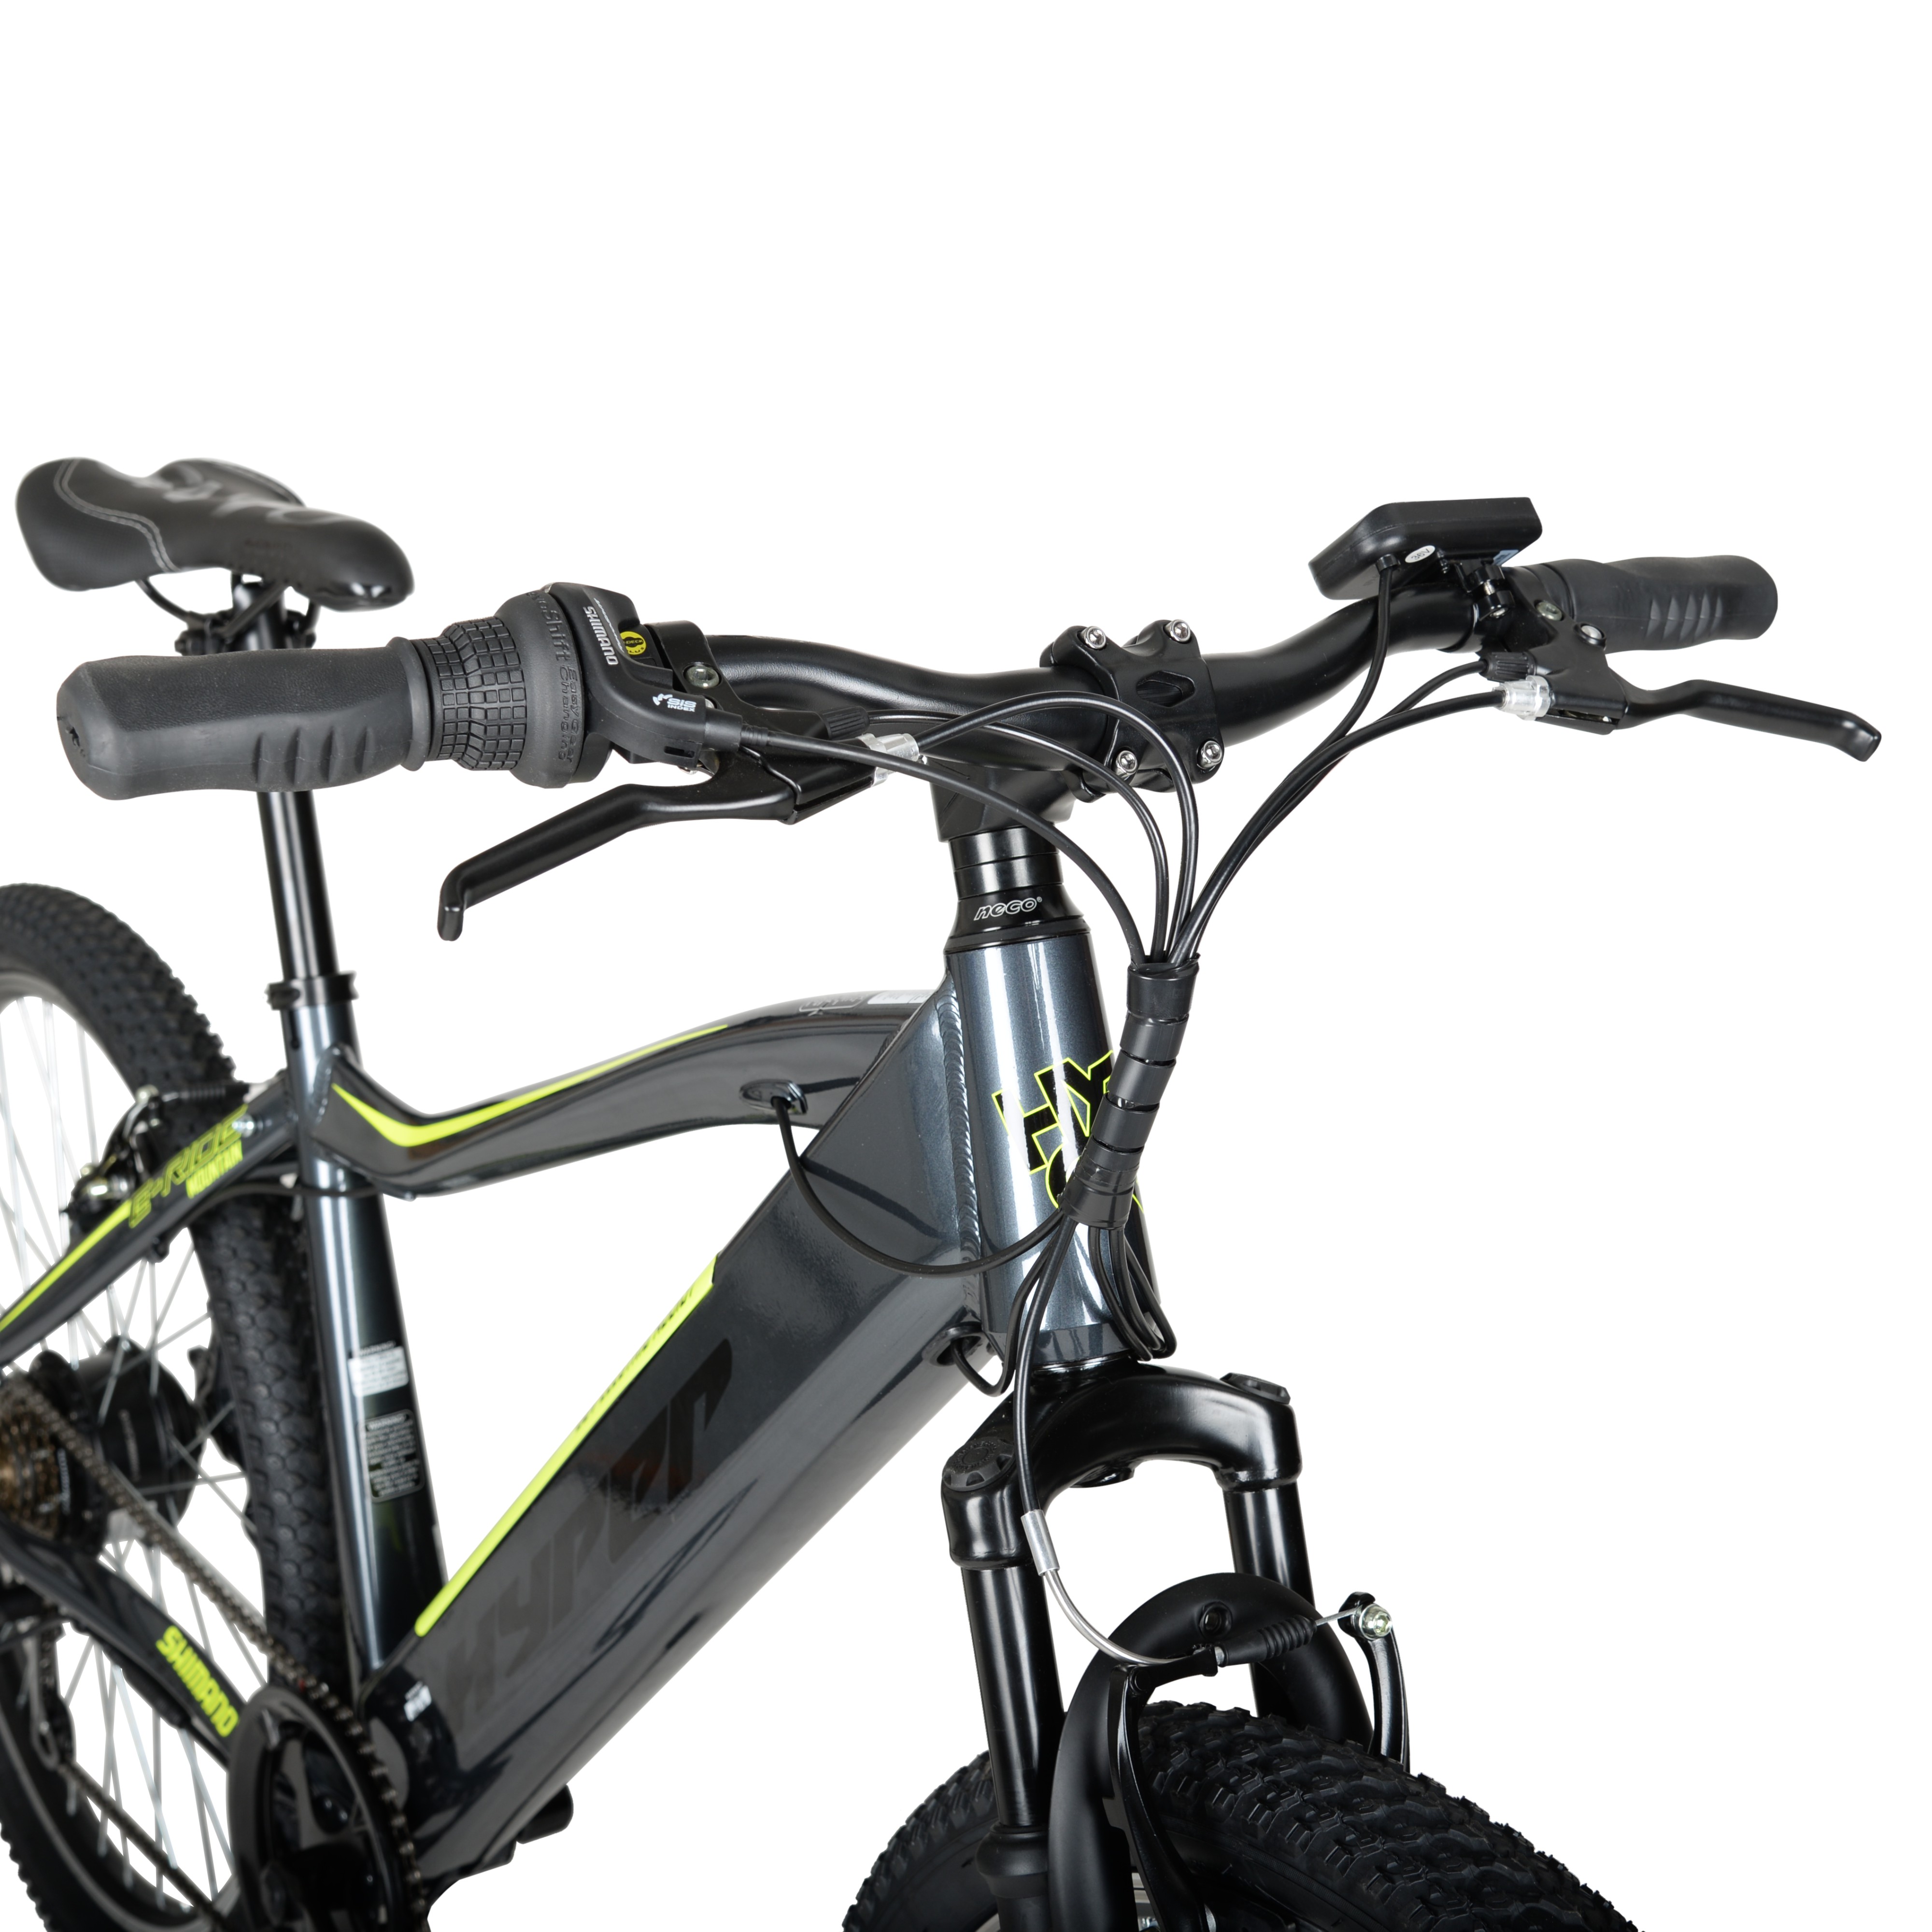 Hyper Bicycles 26" 36V Electric Mountain Bike for Adults, Pedal-Assist, 250W E-Bike Motor, Black - image 5 of 17